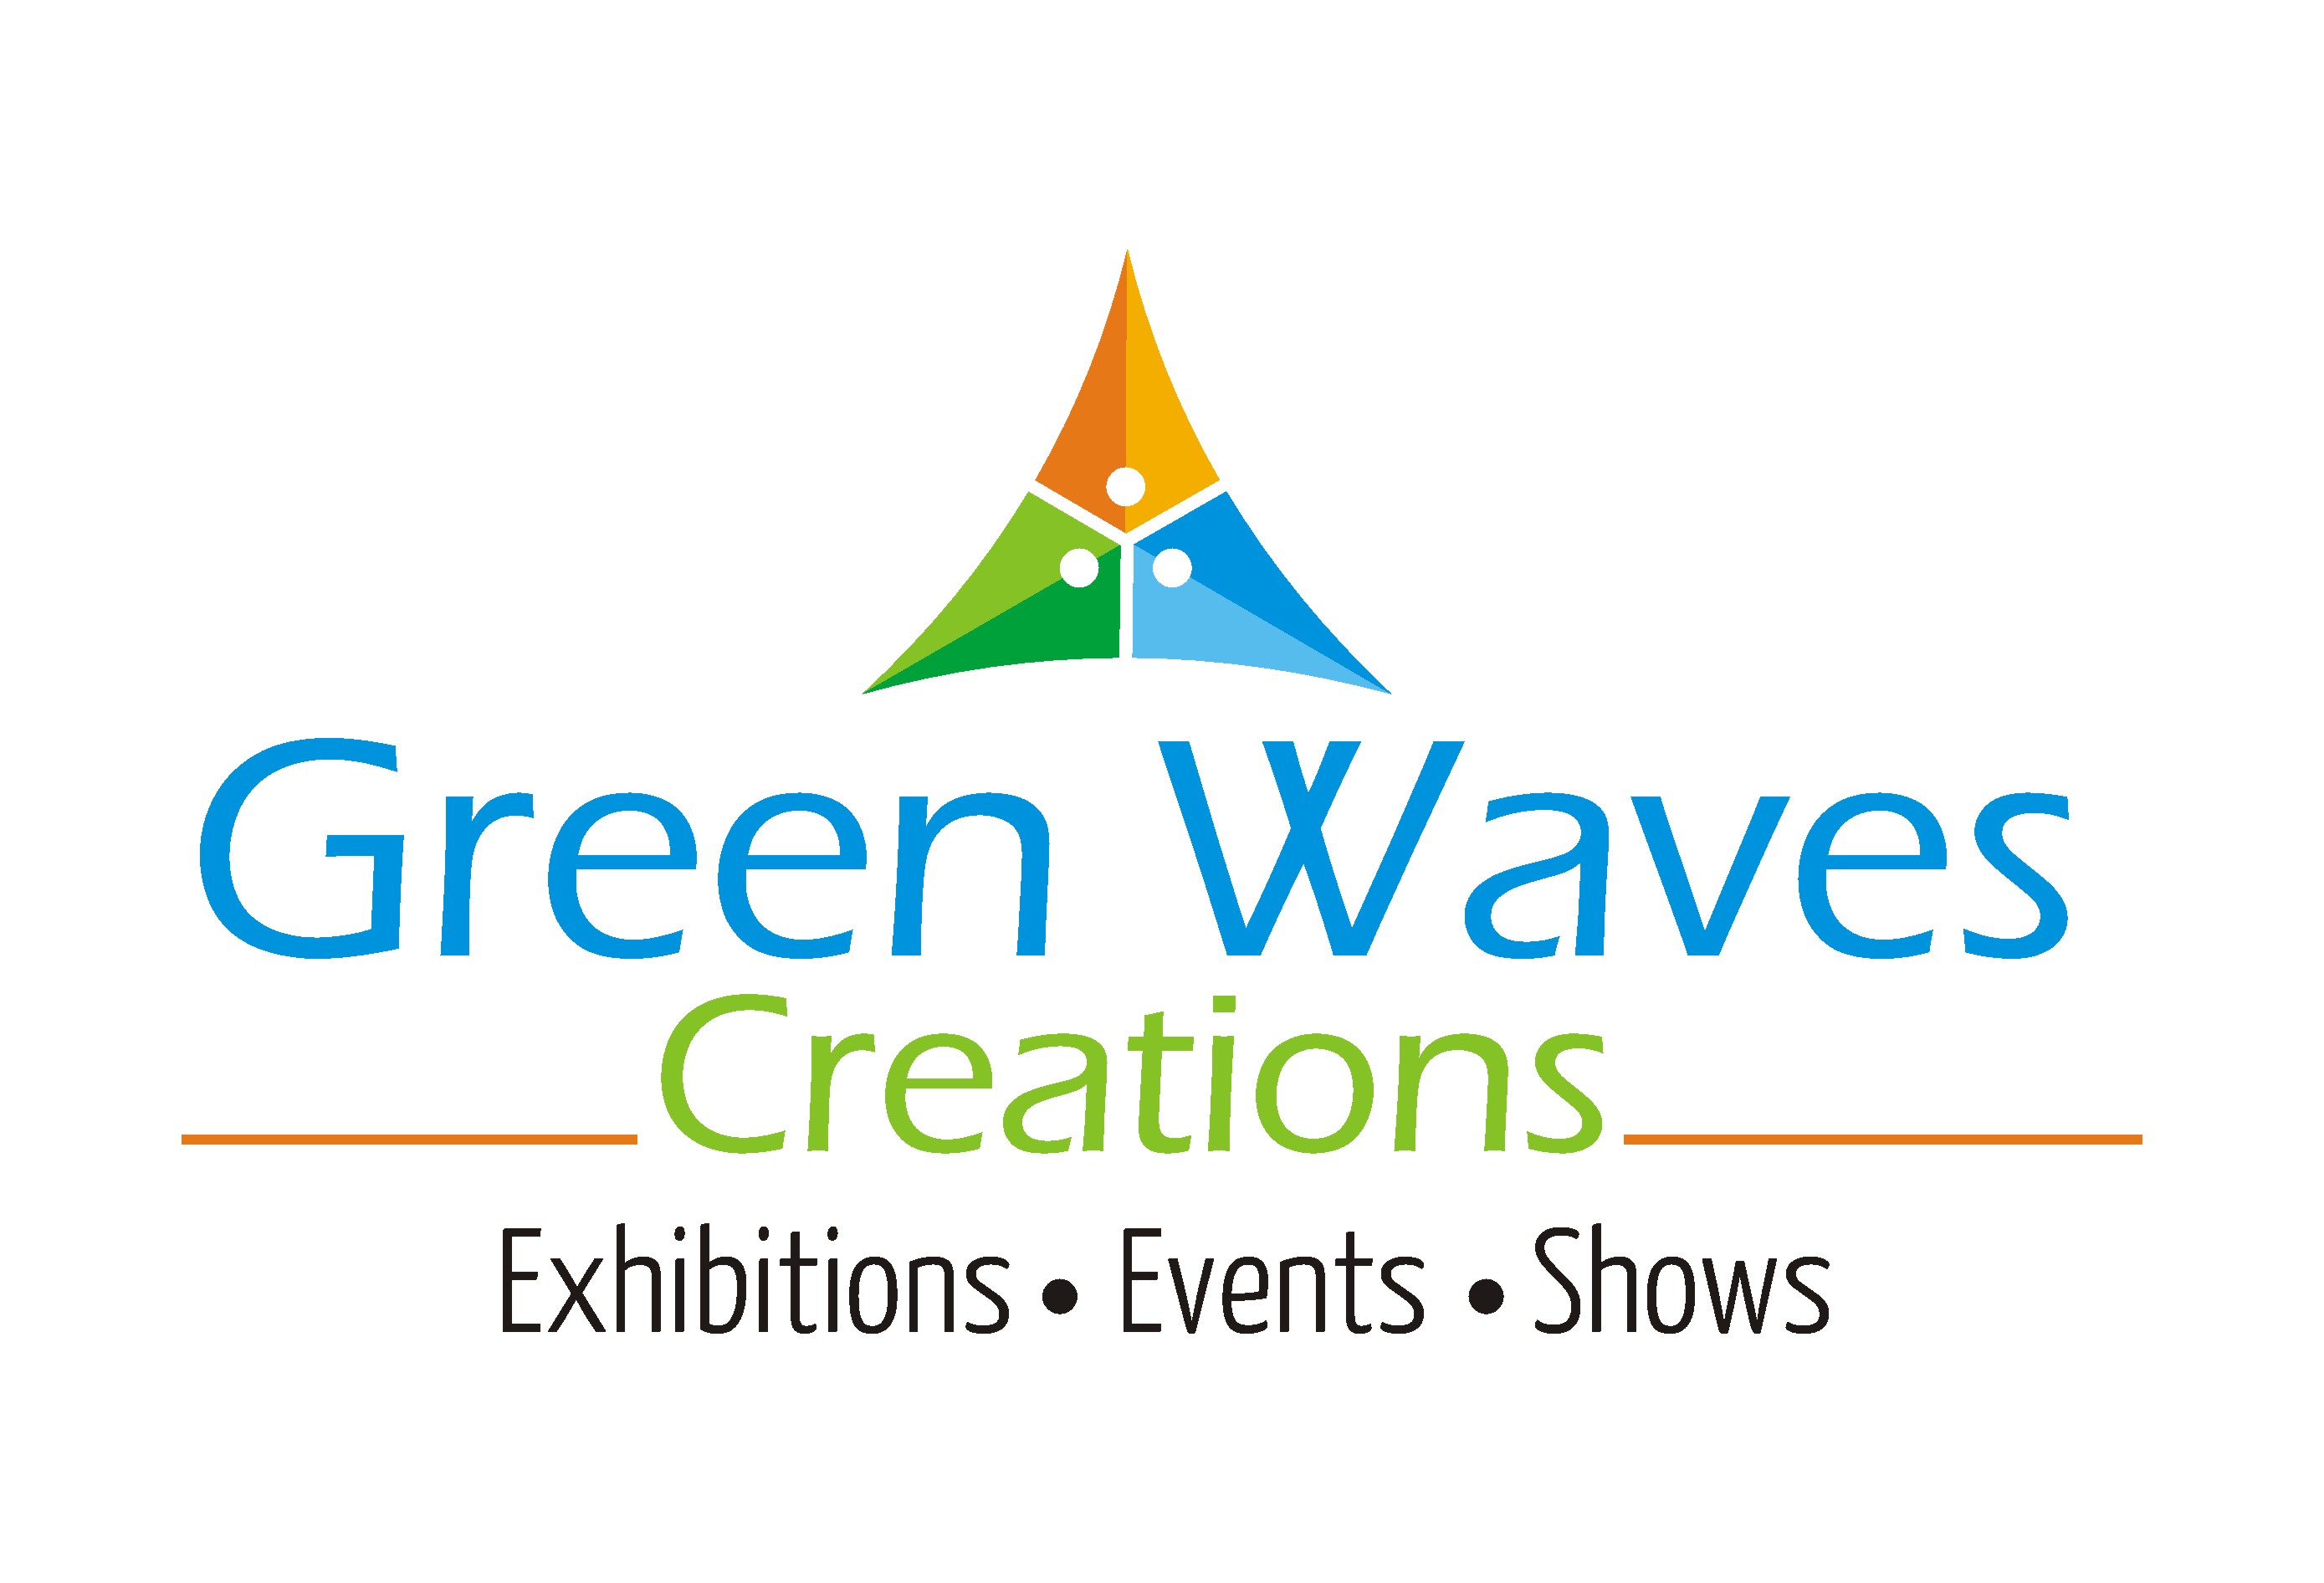 Green Waves Events